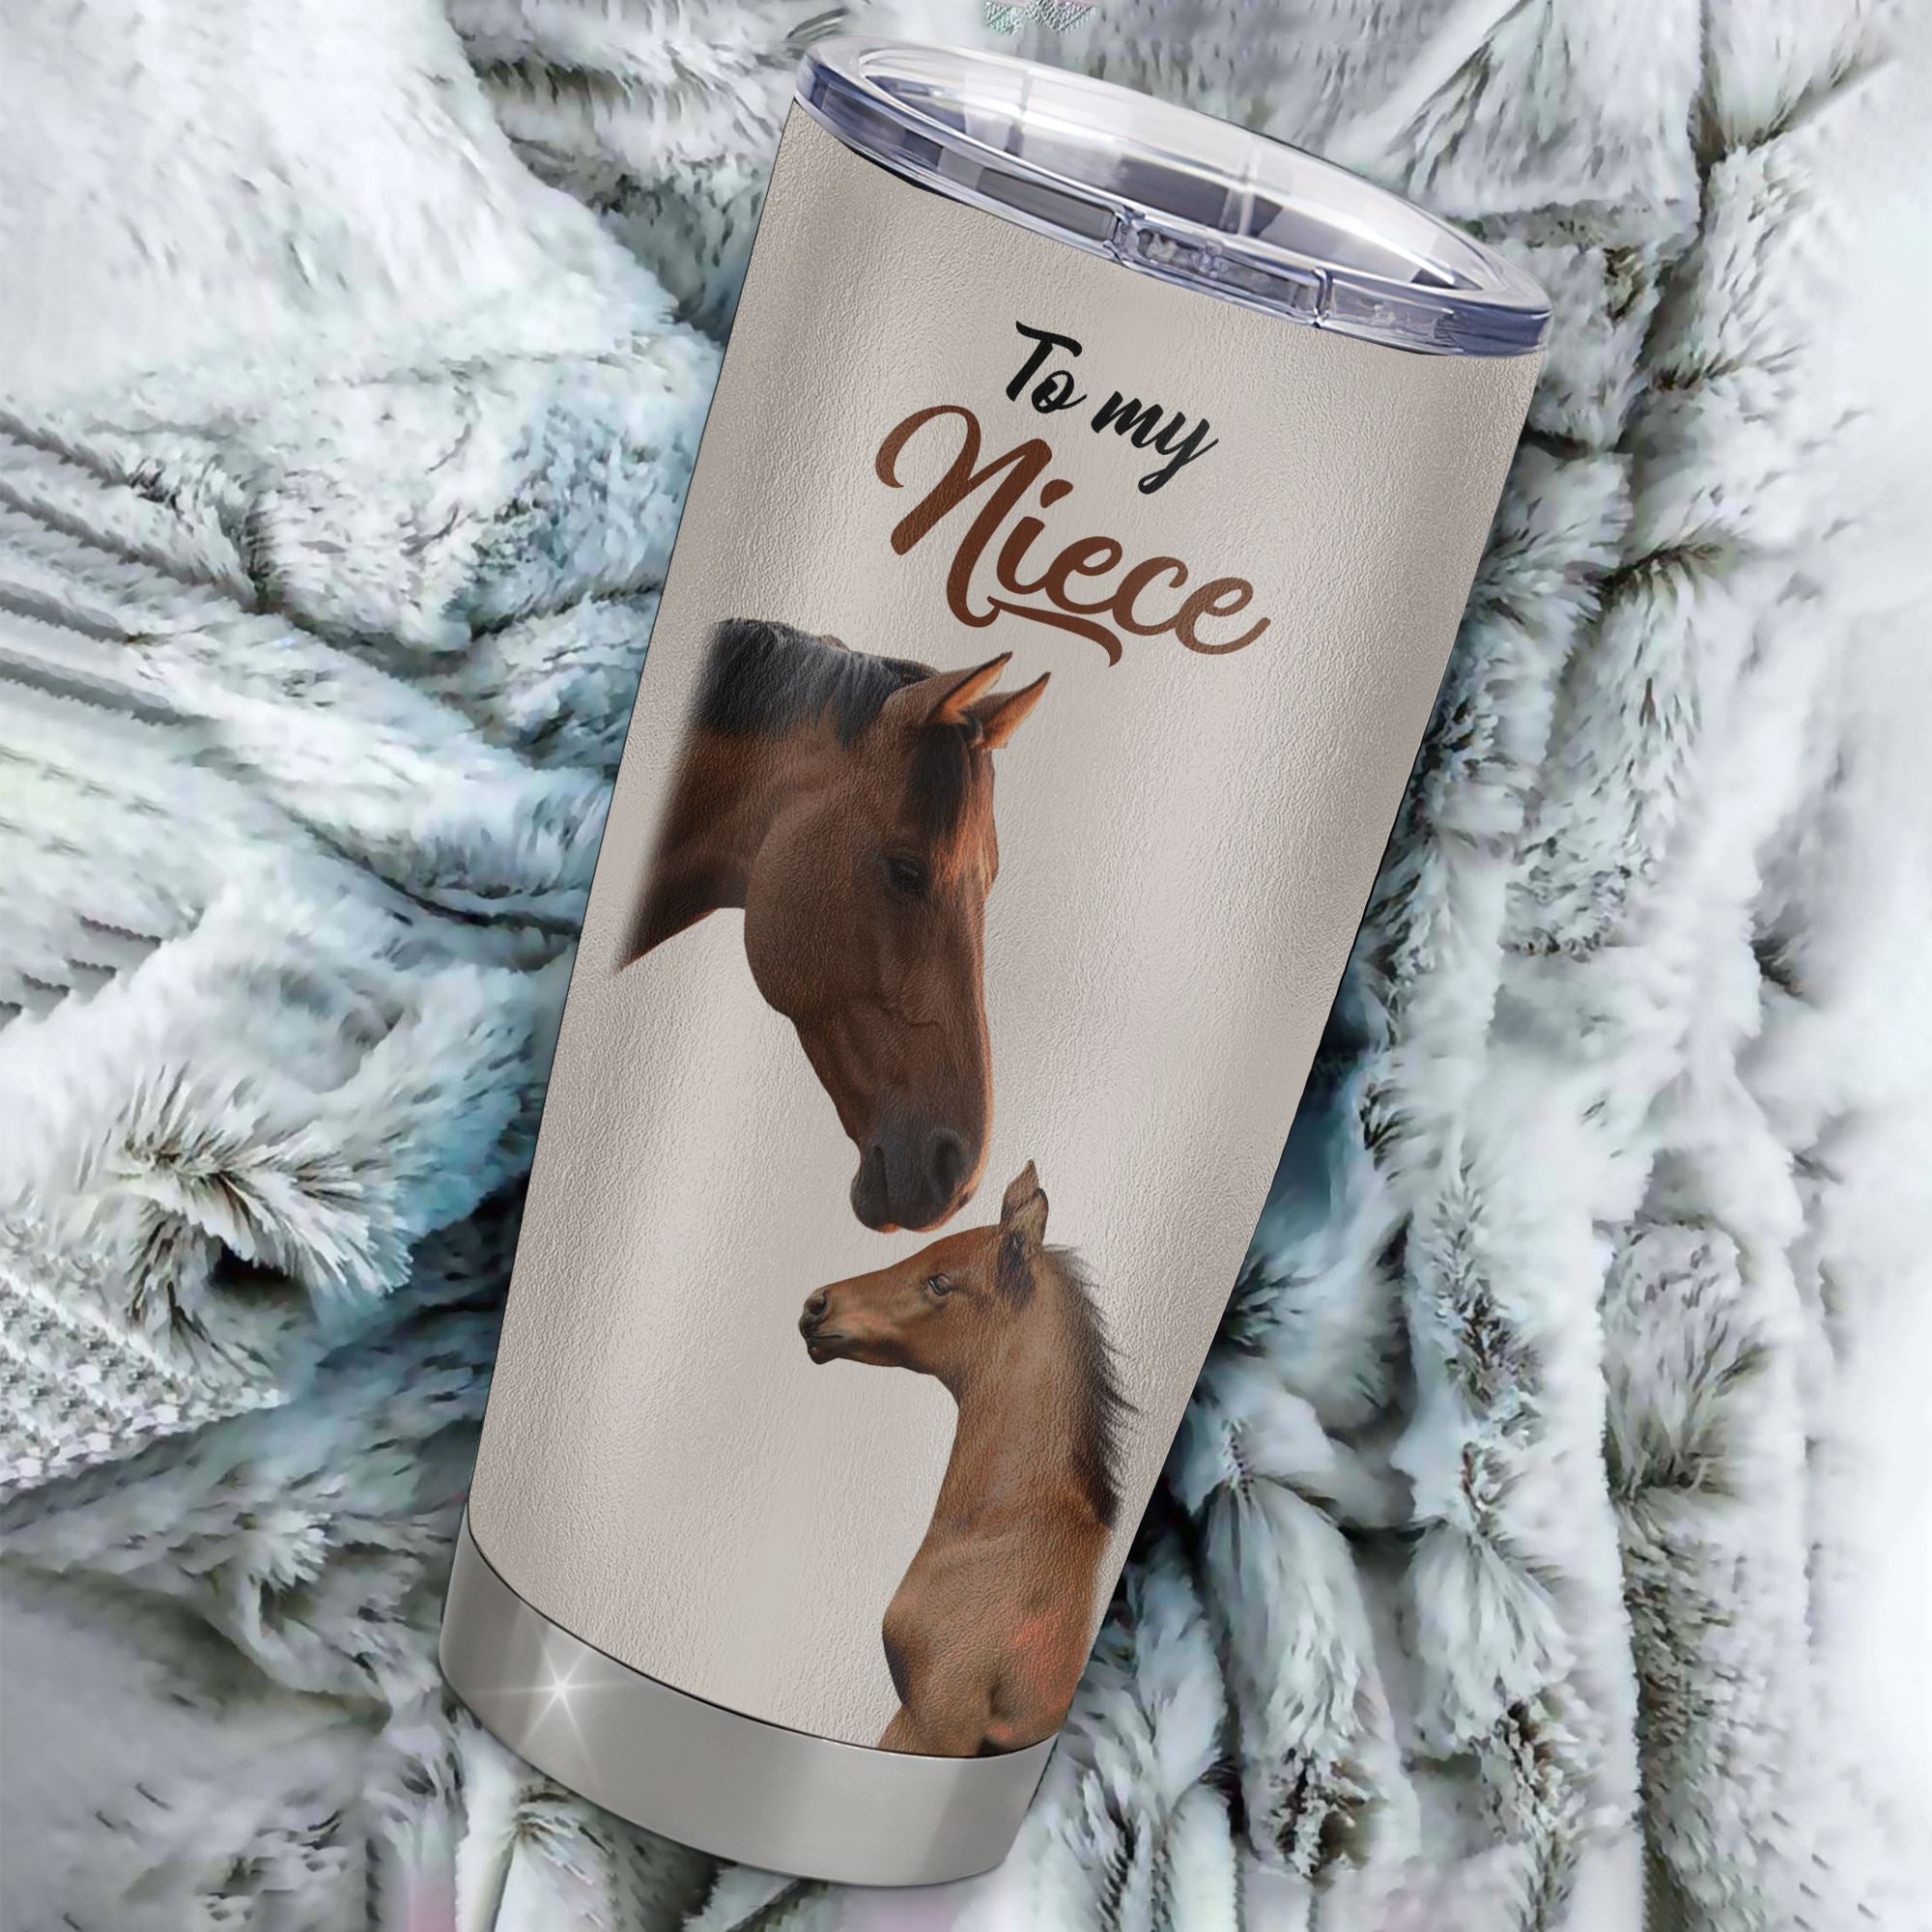 Personalized_To_My_Niece_Tumbler_From_Aunt_Auntie_Uncle_Stainless_Steel_Cup_This_Old_Horse_Love_You_Niece_Birthday_Graduation_Christmas_Custom_Travel_Mug_Tumbler_mockup_1.jpg